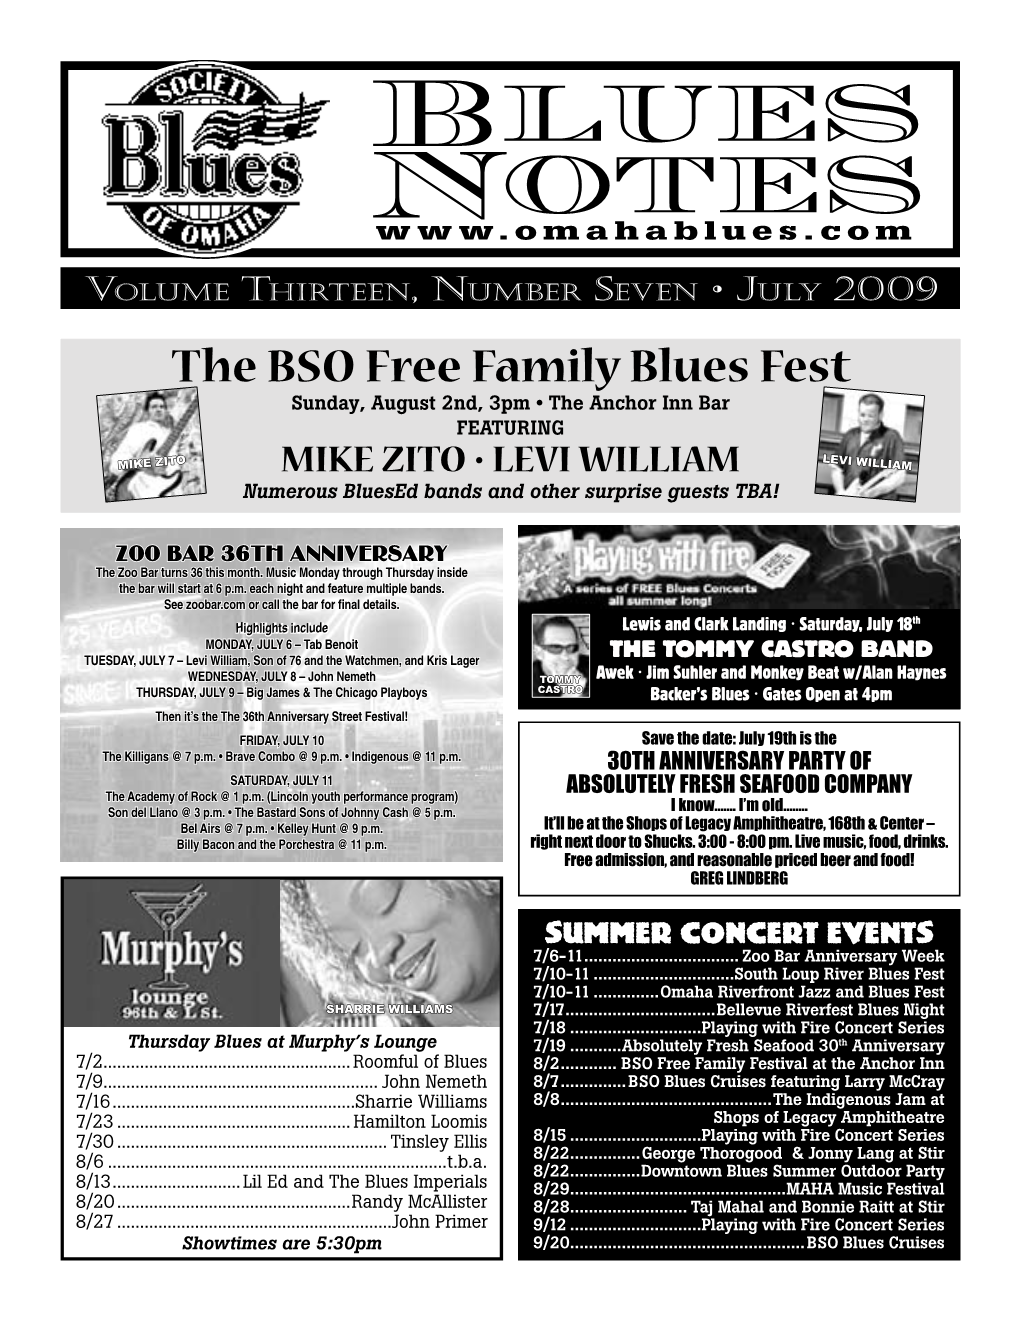 The BSO Free Family Blues Fest Sunday, August 2Nd, 3Pm • the Anchor Inn Bar Featuring